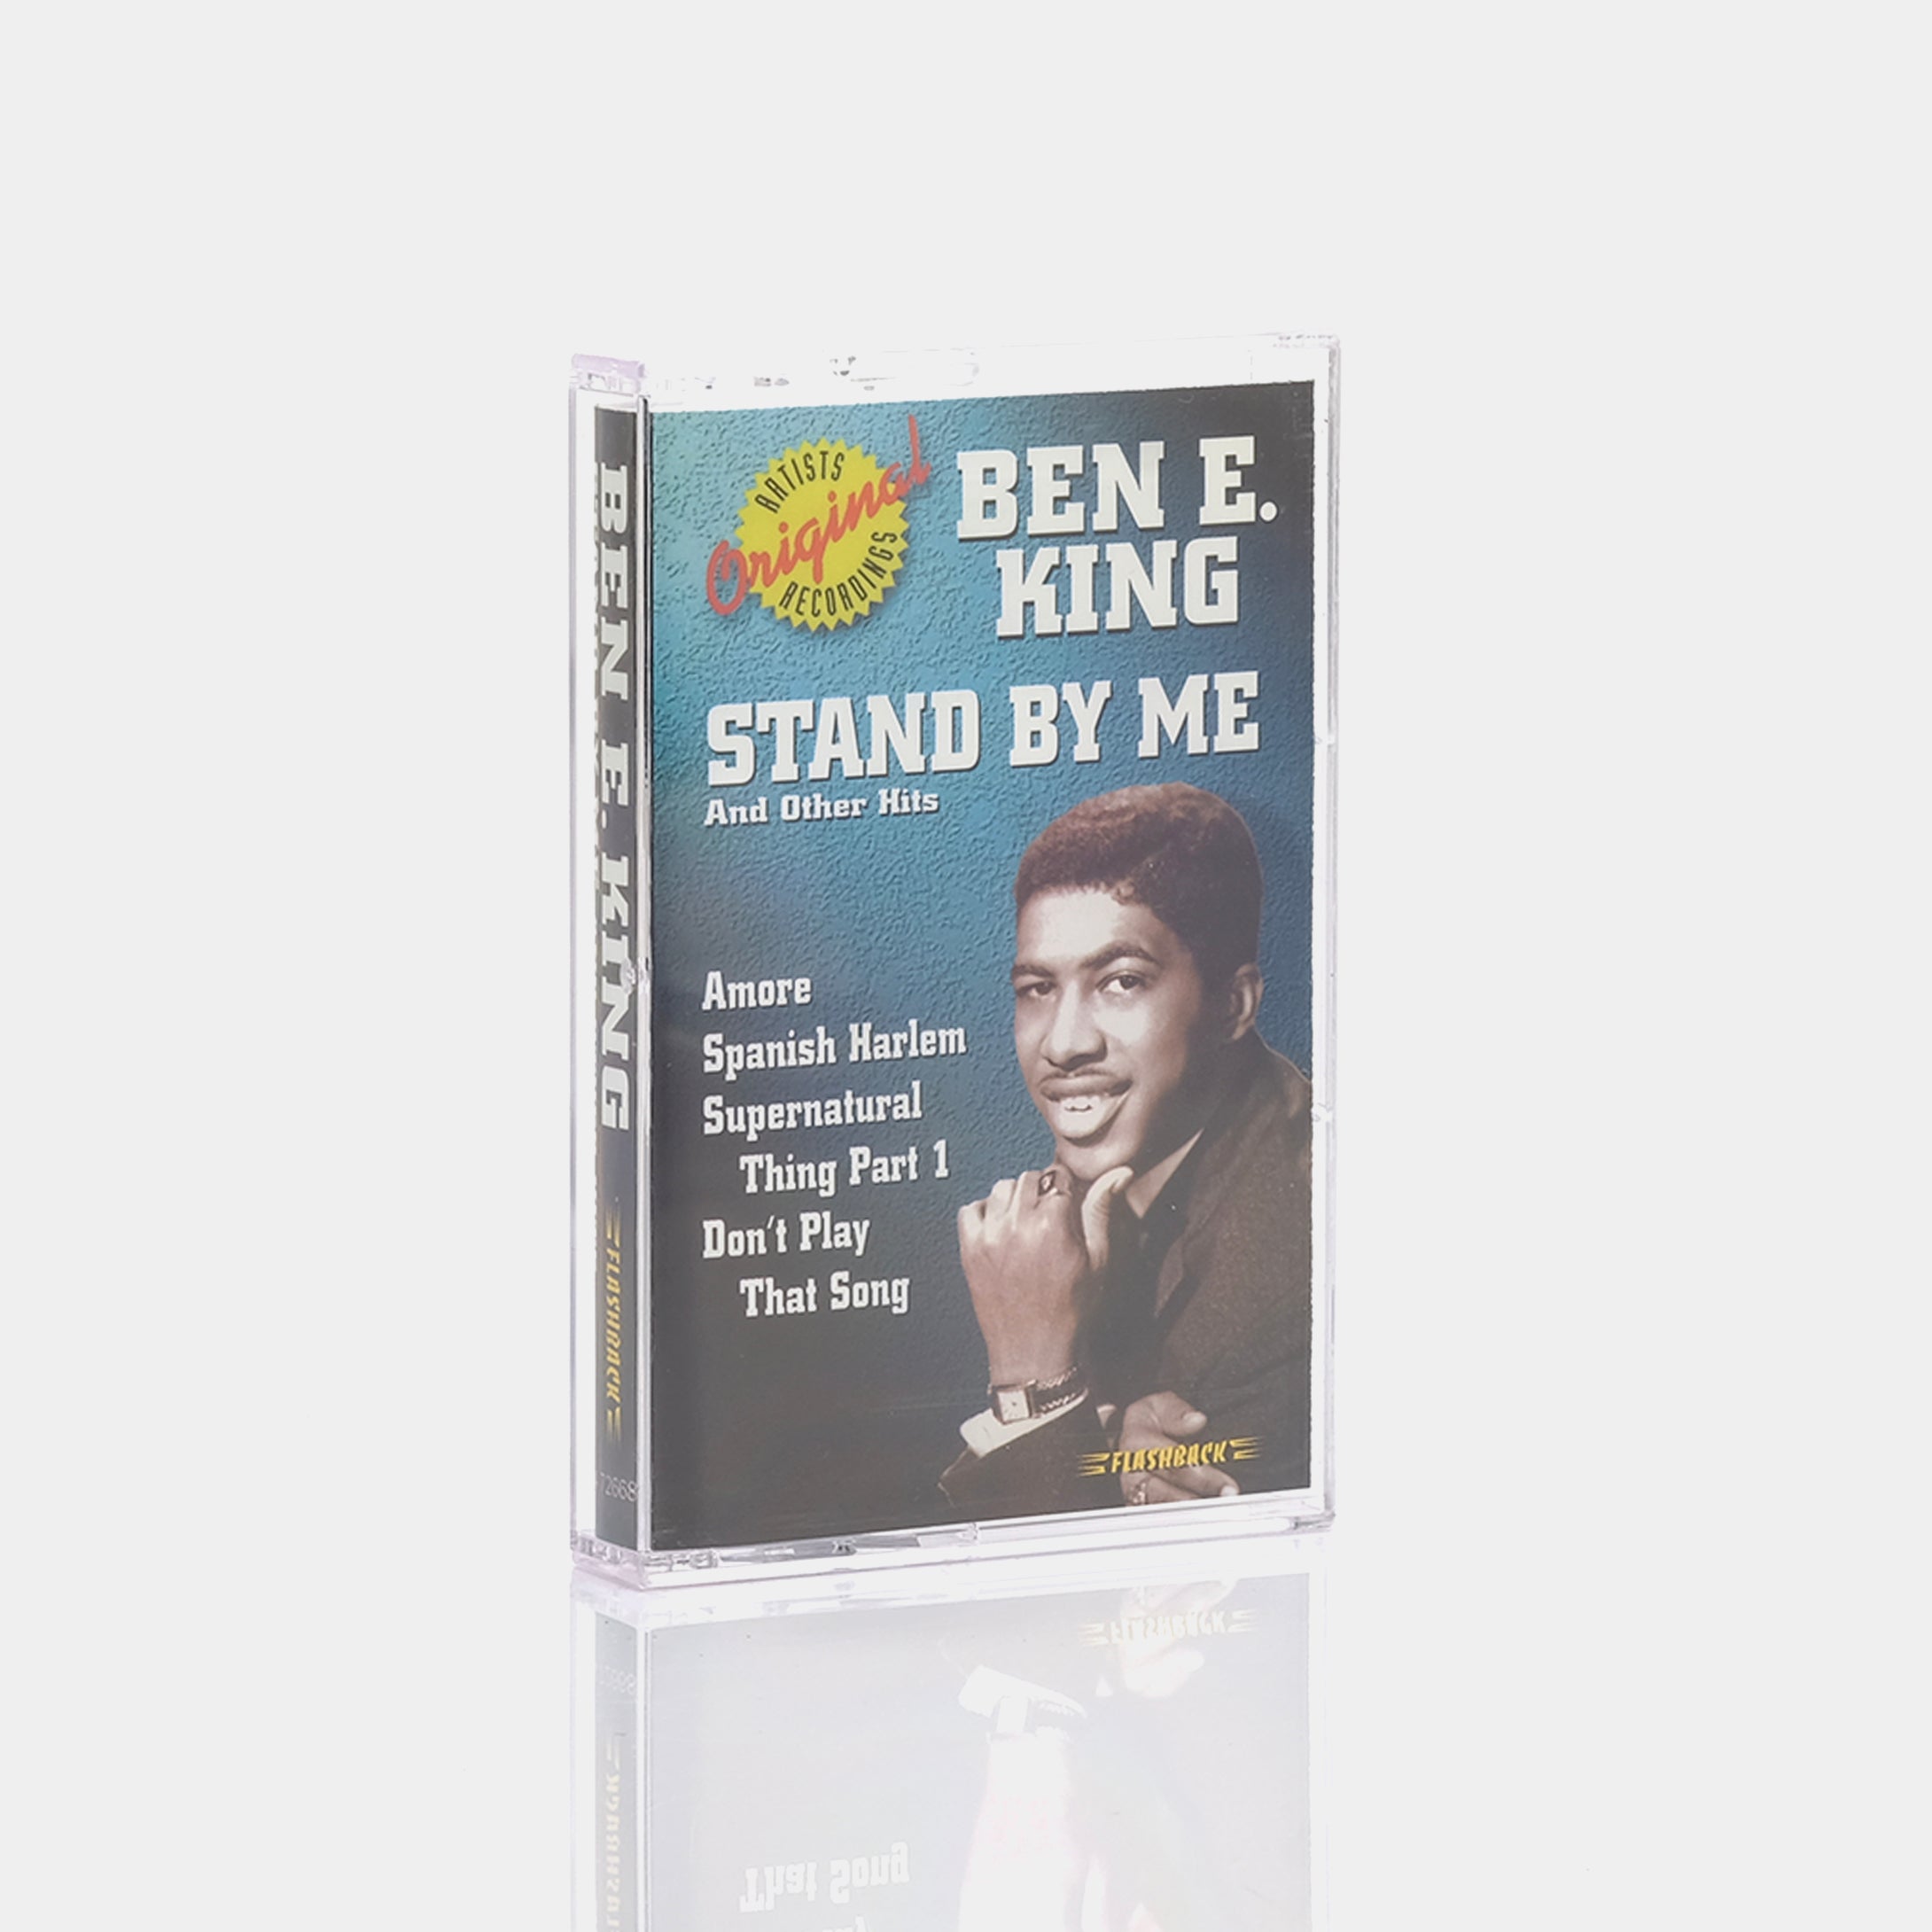 Ben E. King - Stand By Me and Other Hits Cassette Tape